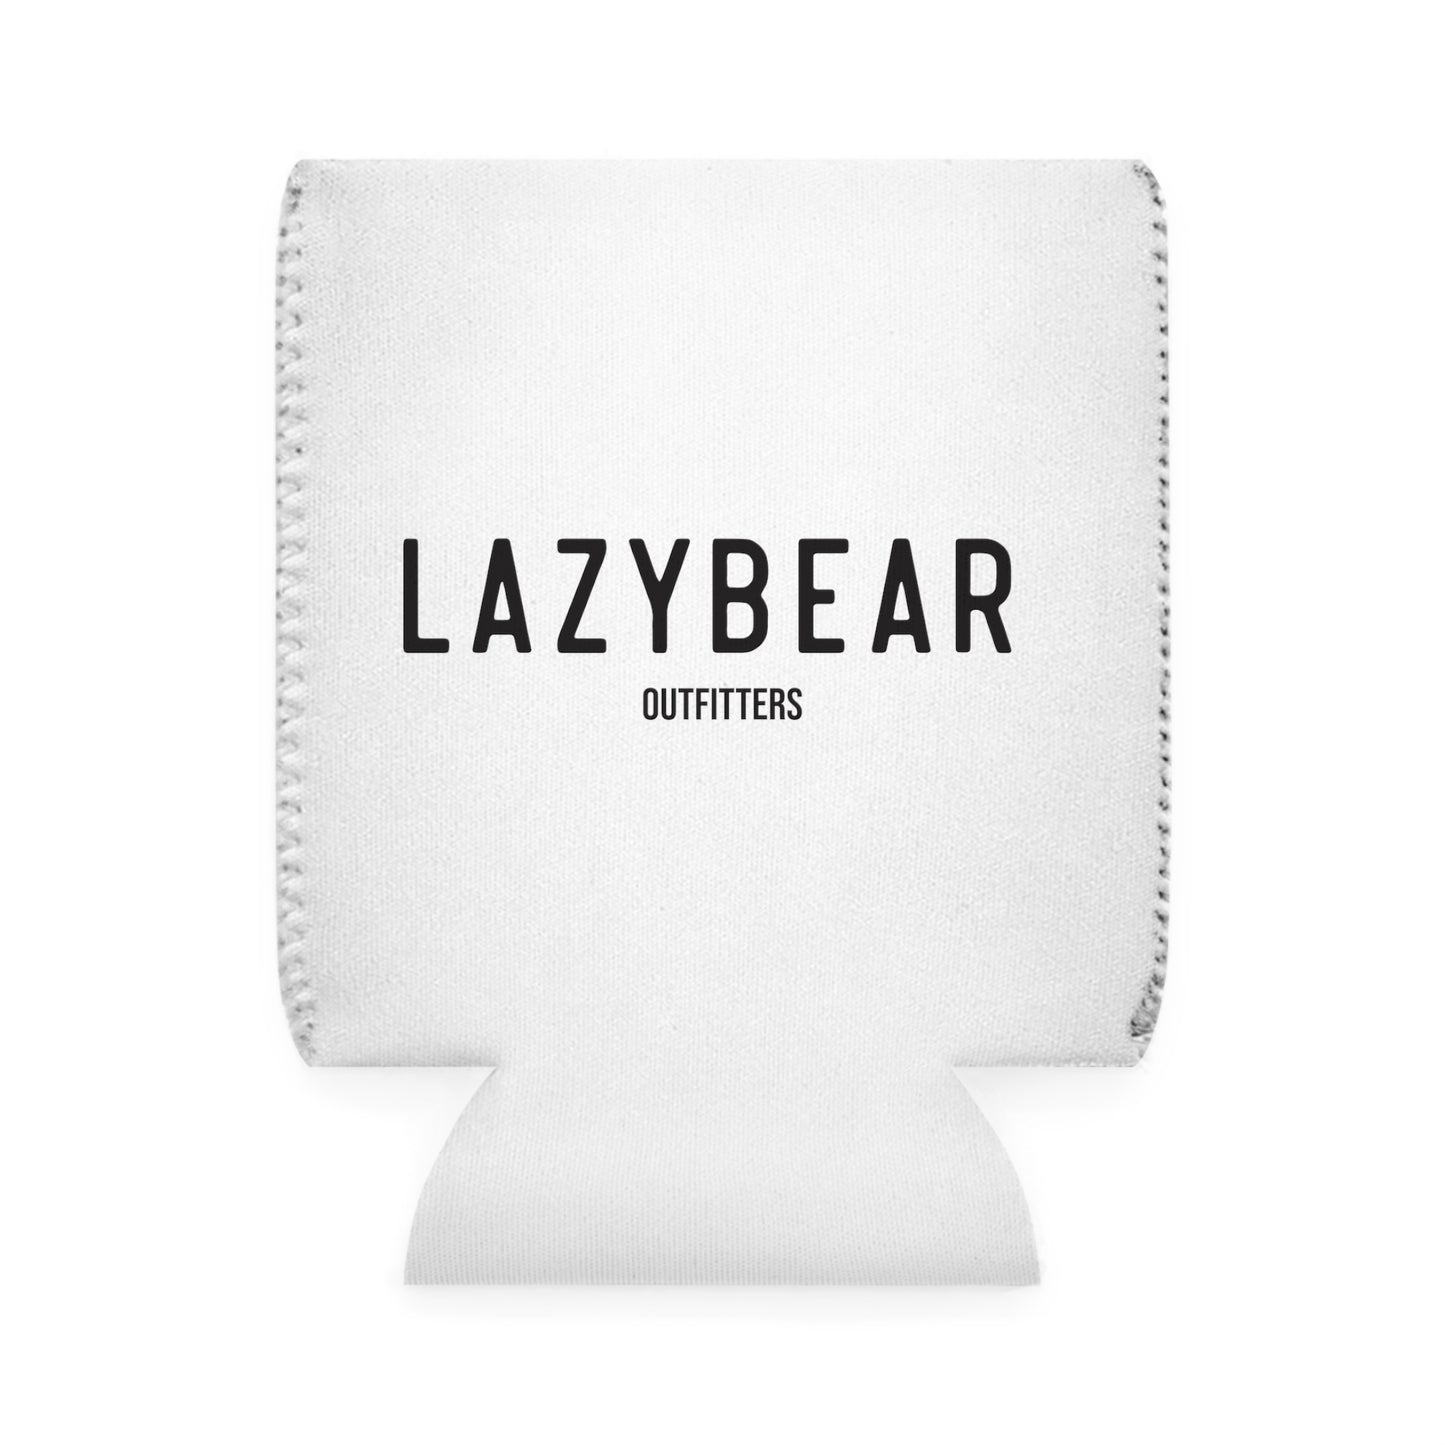 Lazy Bear Outfitters' Can "Cozy"